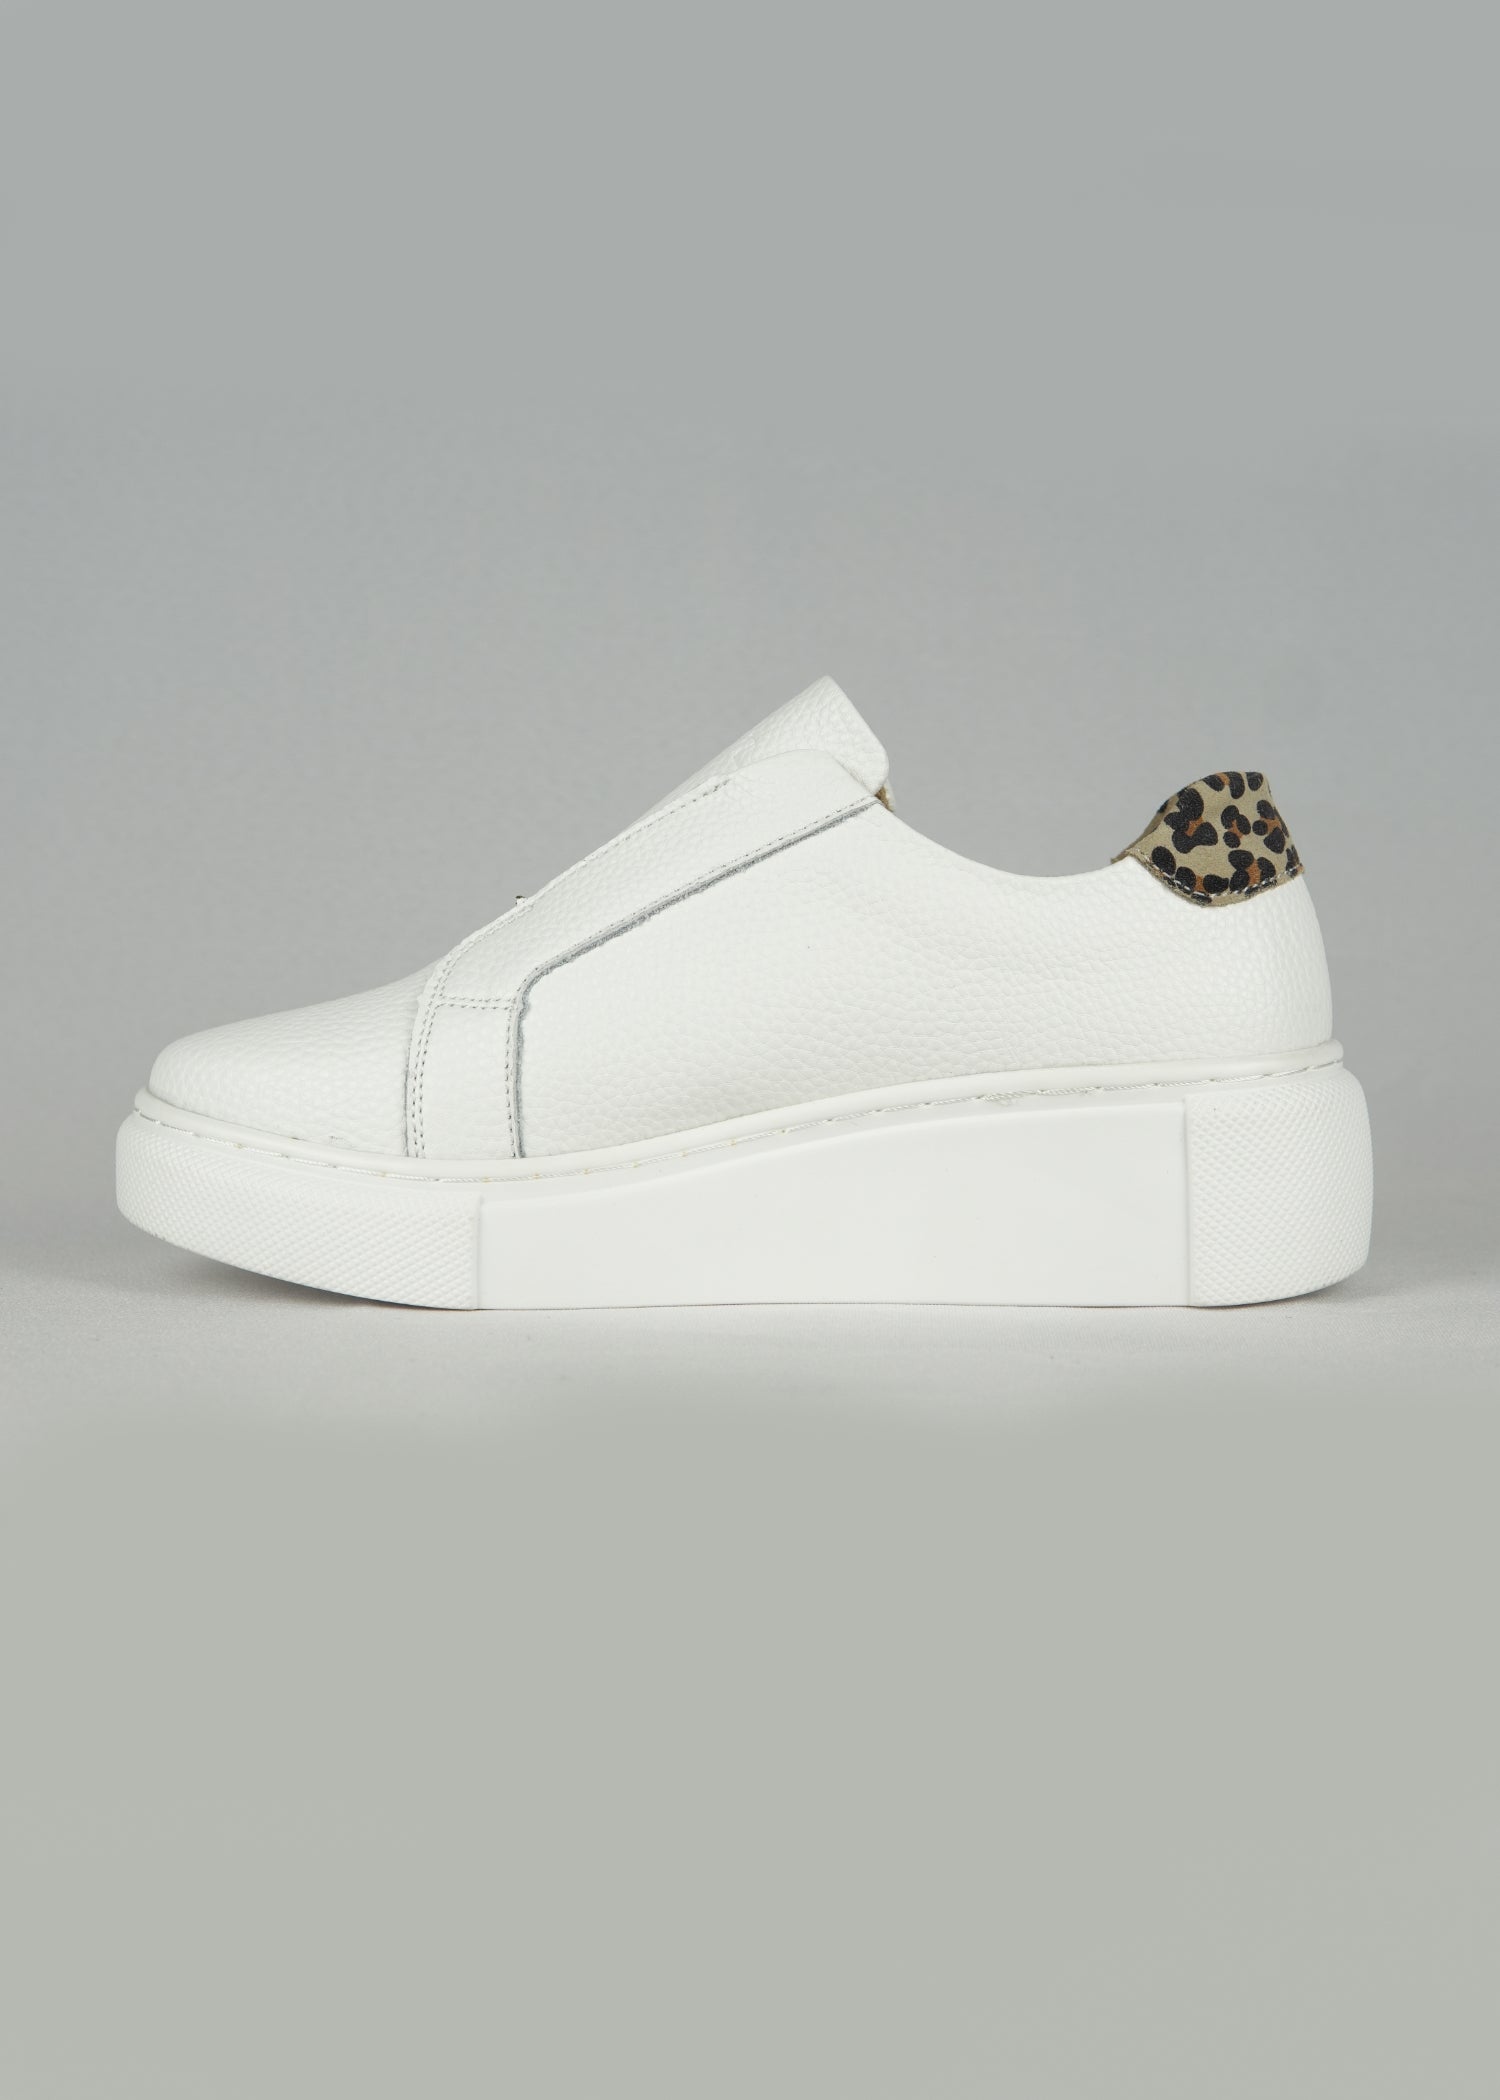 Serena Sneaker With Animal Print In White And Gold